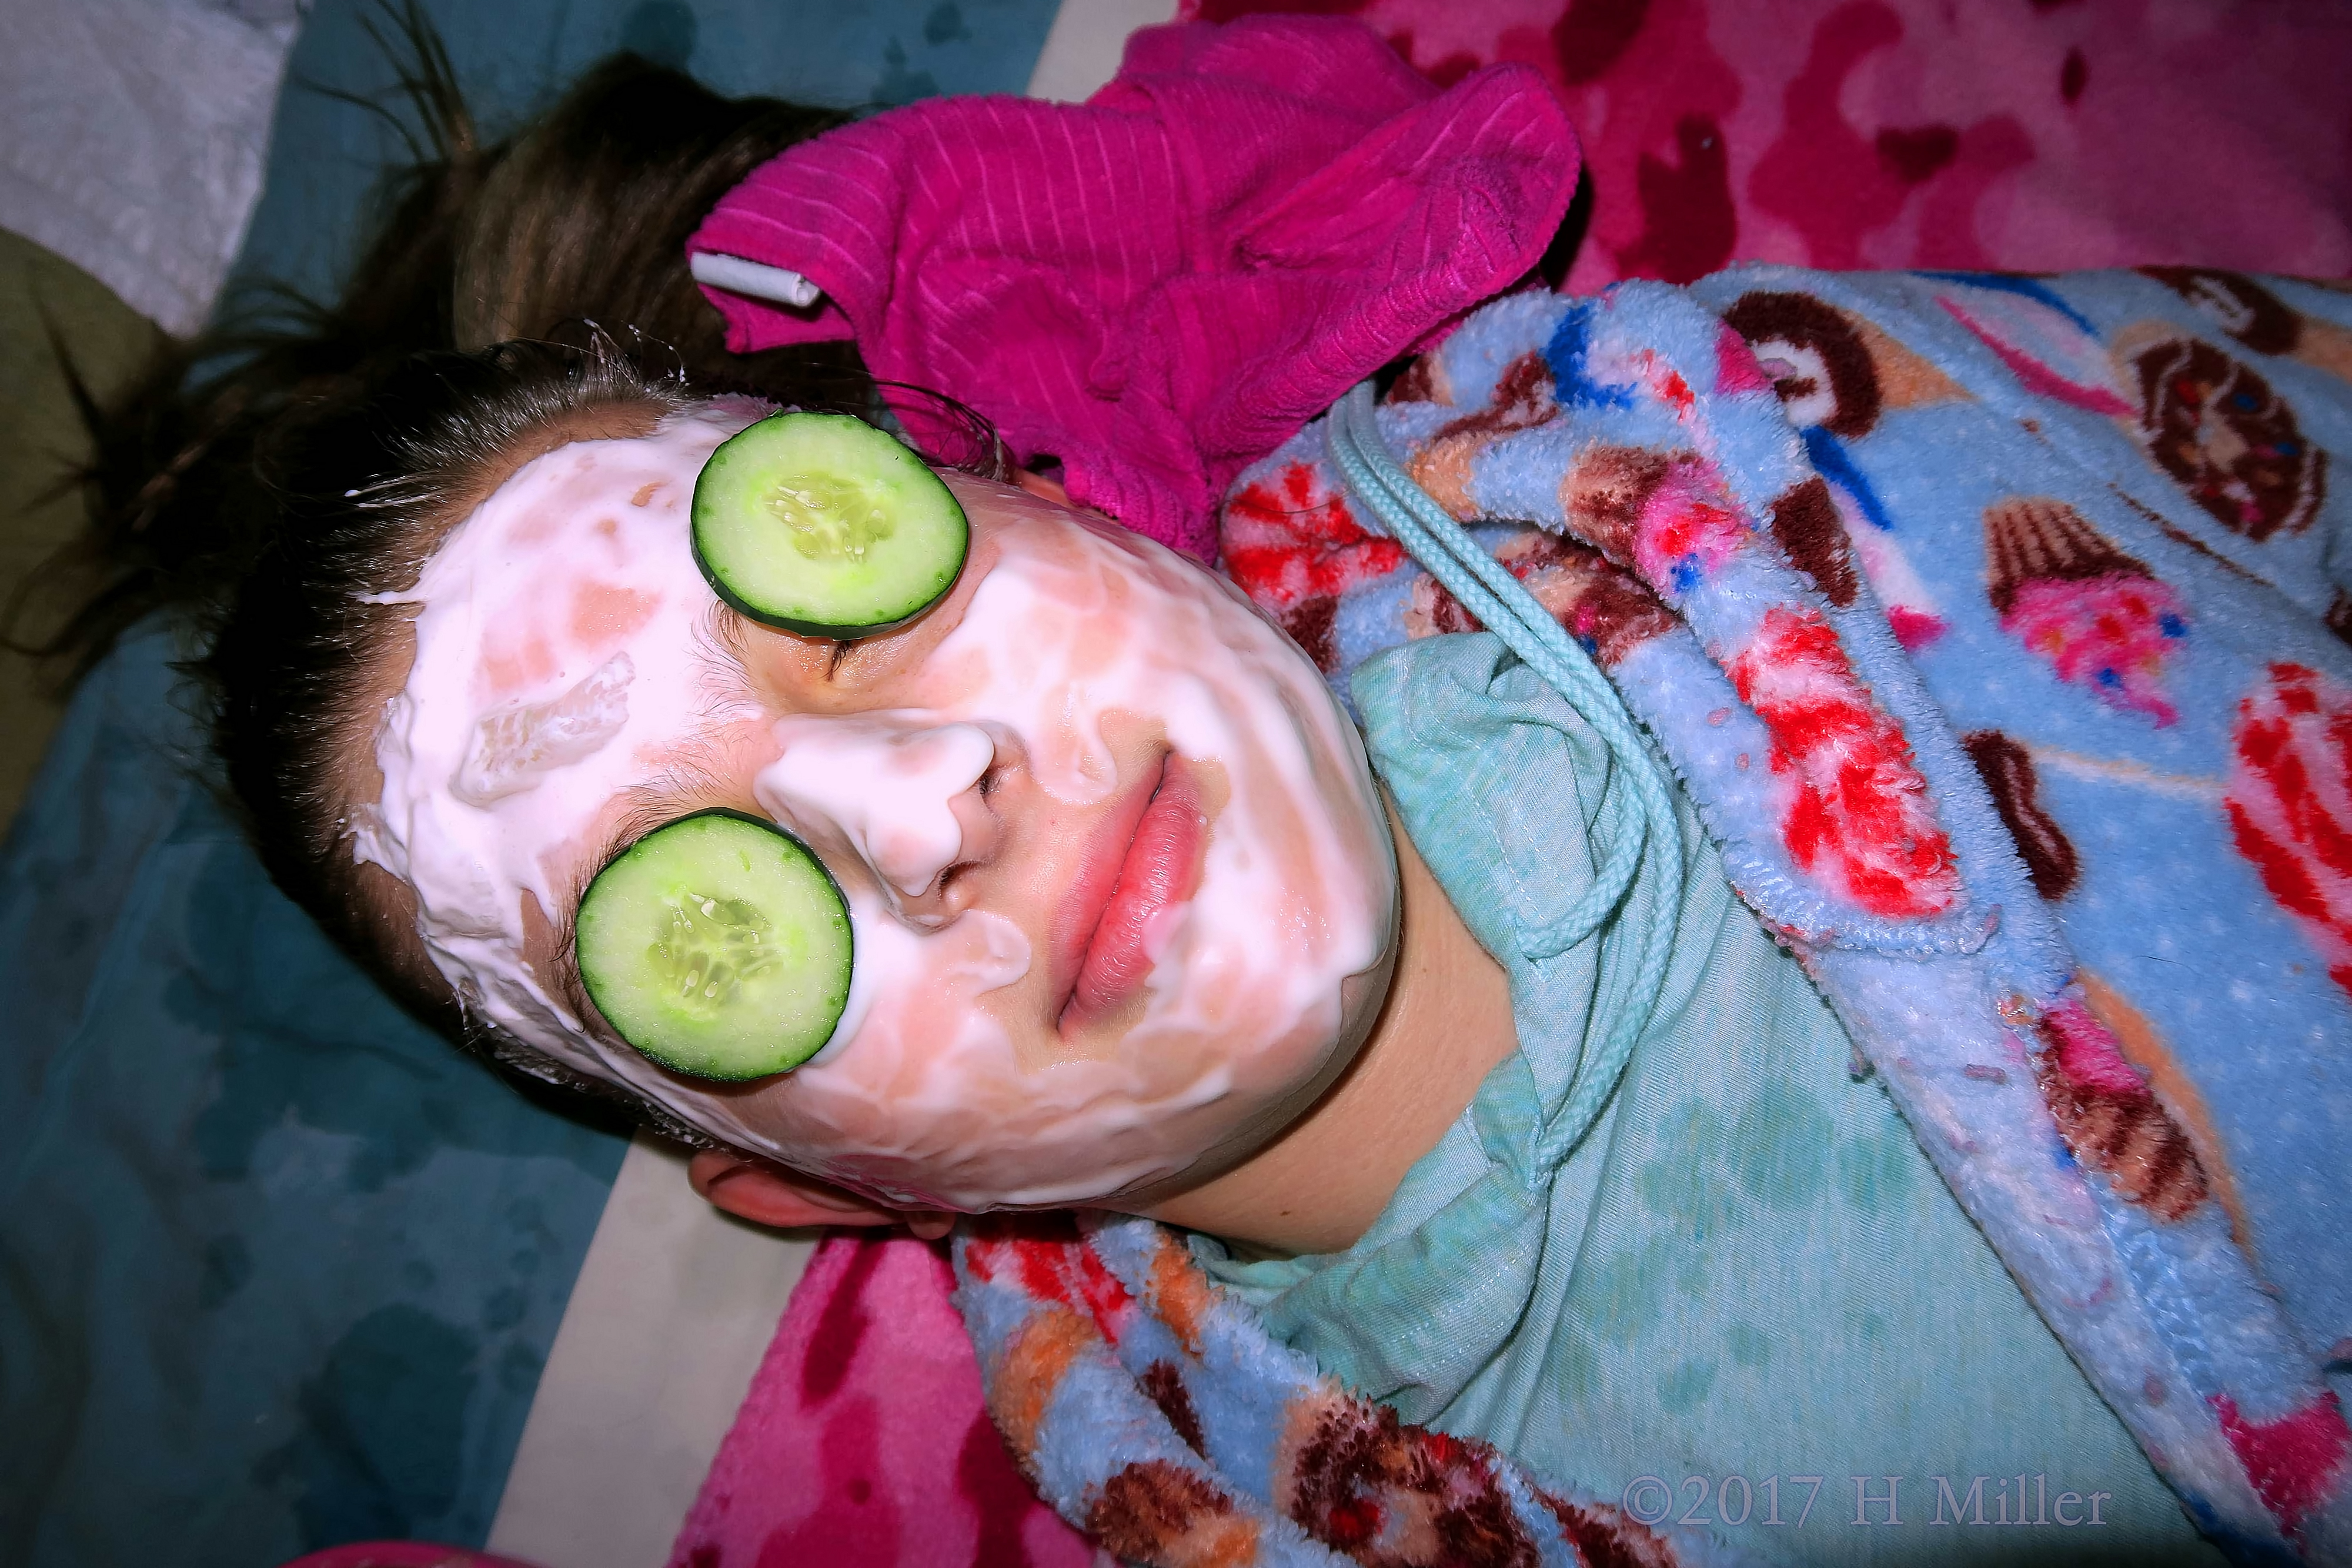 How Am I Looking With This Kids Facial Mask With Cucumbers On My Eyes! 4